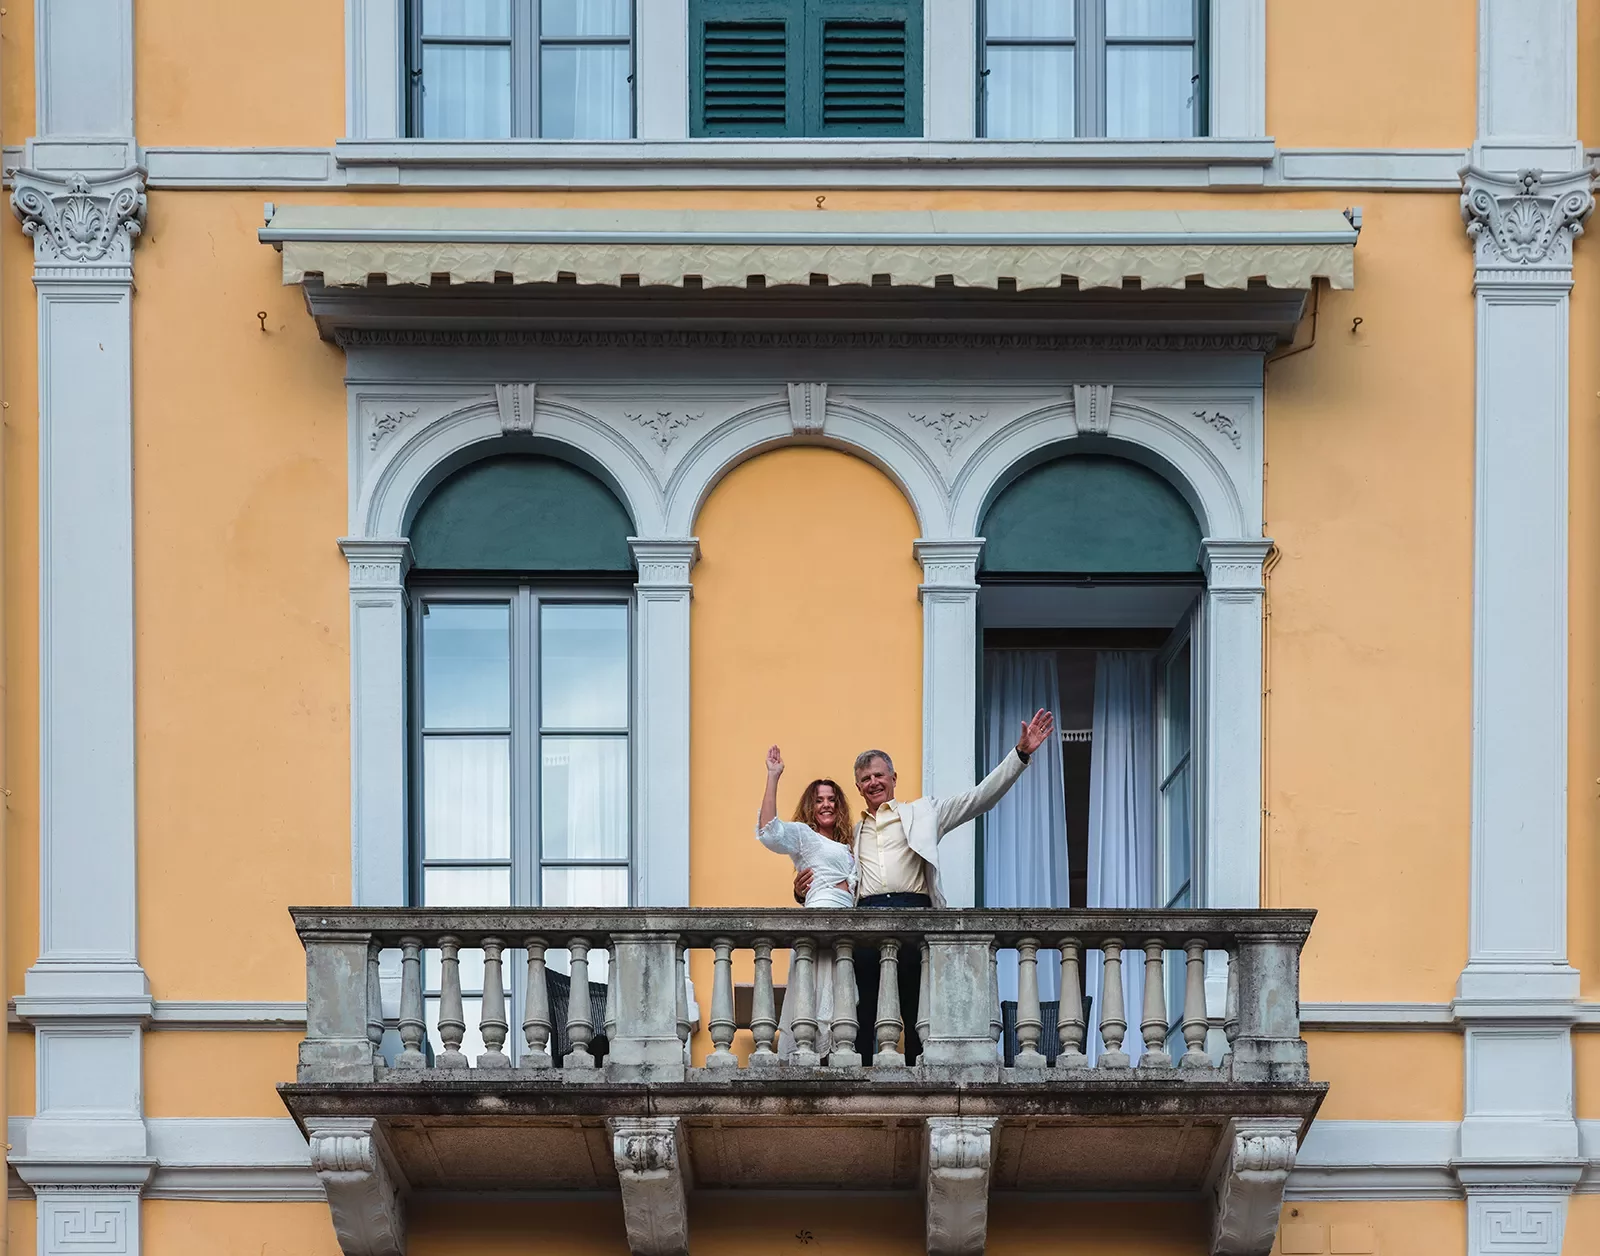 Two guests on balcony, waving to camera.